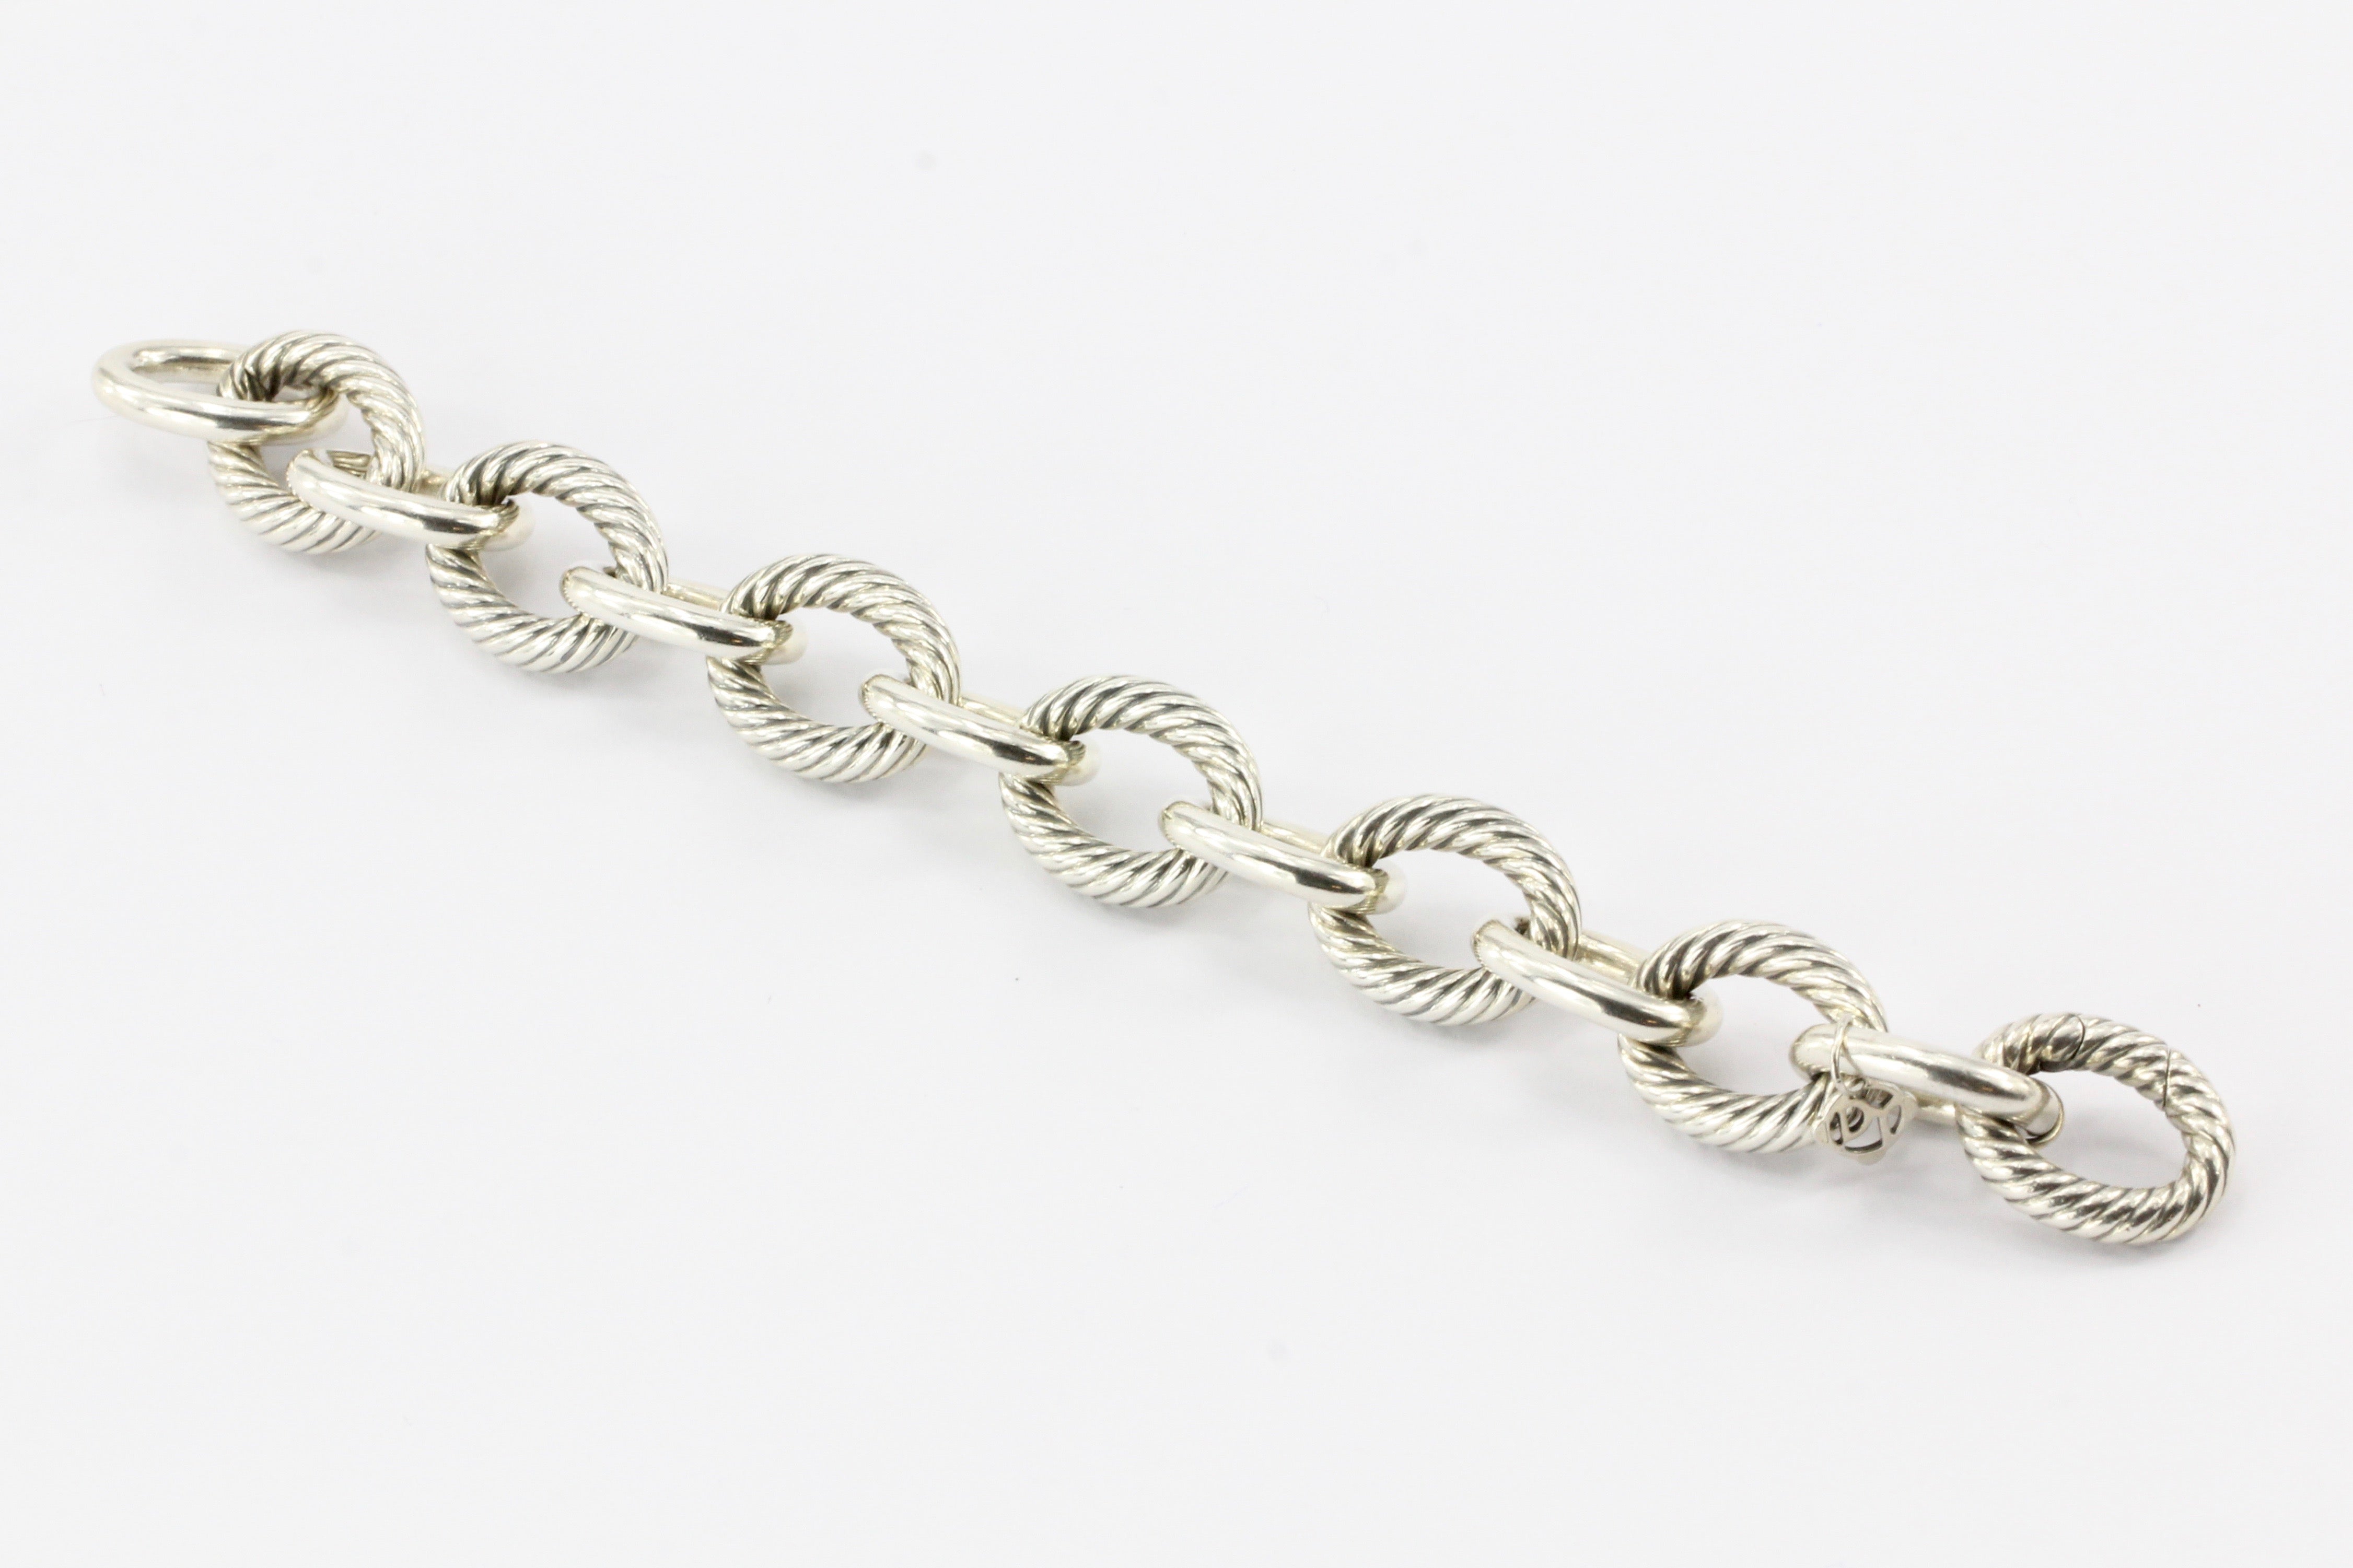 David Yurman Chain Collection Oval Link Chain Bracelet with 18k Yellow Gold  | Lee Michaels Fine Jewelry store